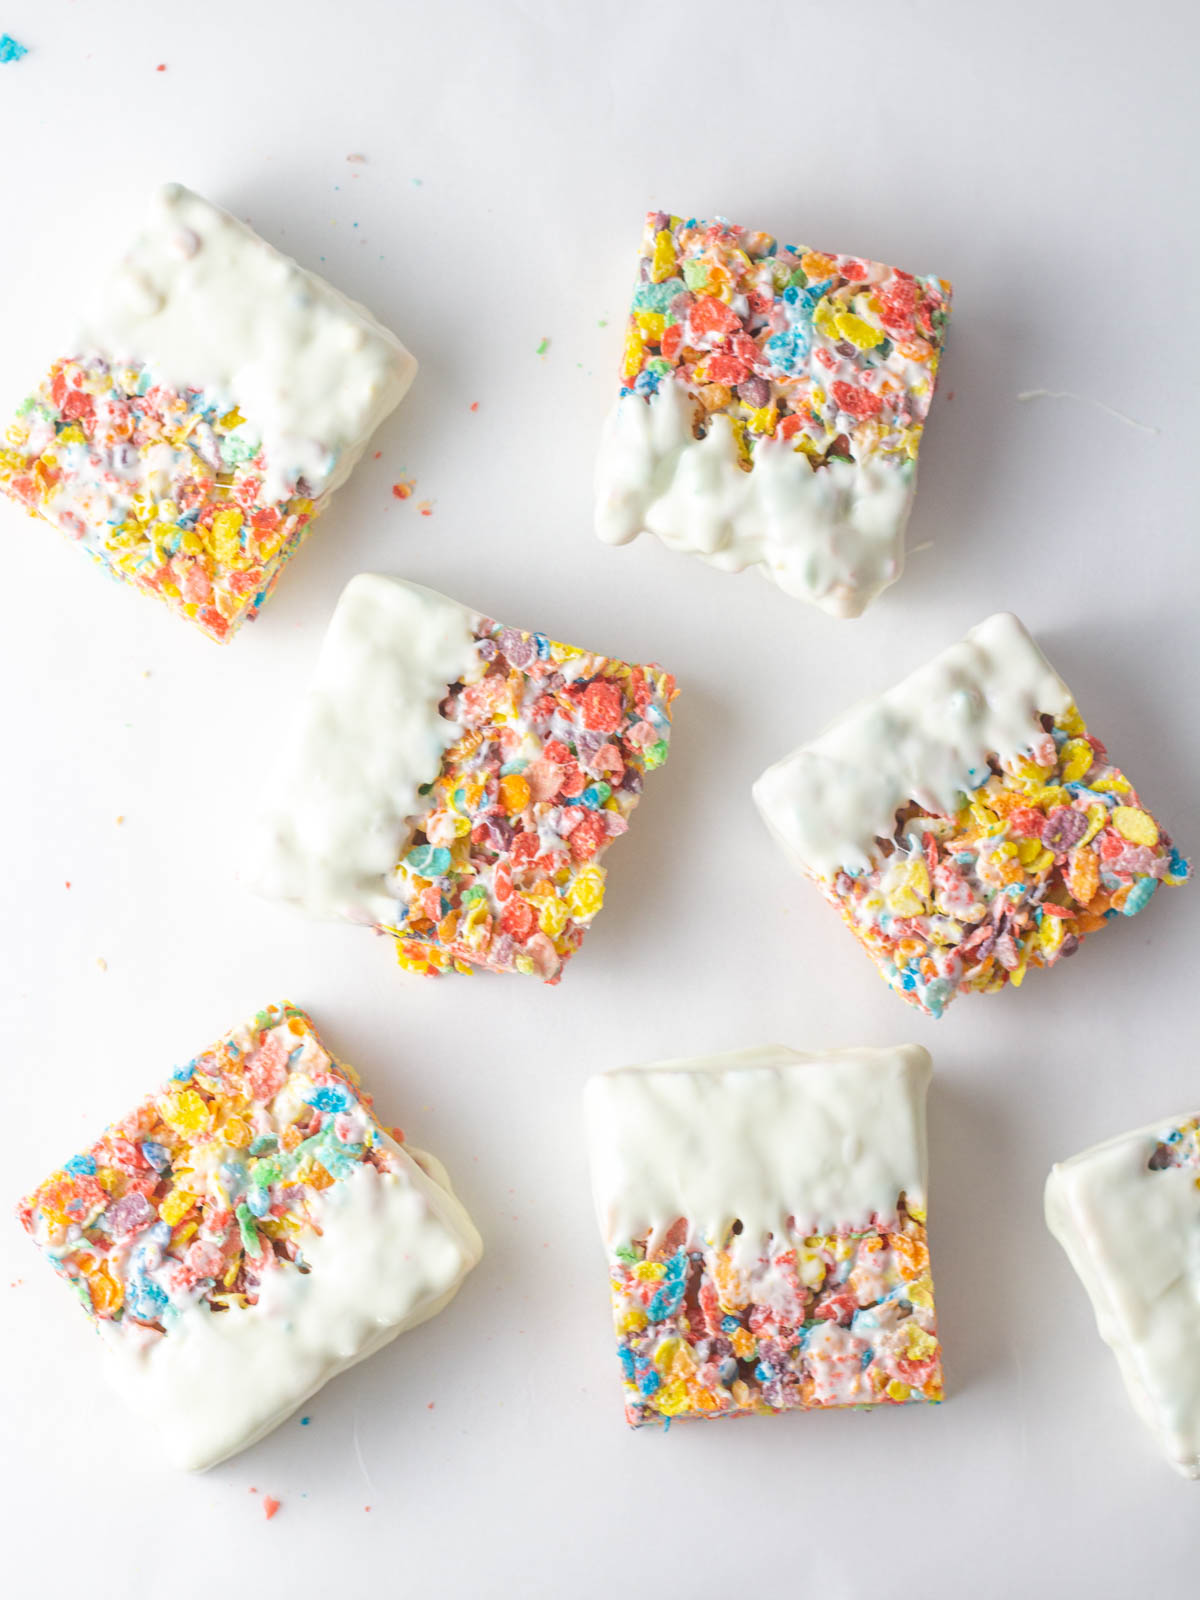 Square Fruity Pebbles Bars with half of each bar dipped into white chocolate.